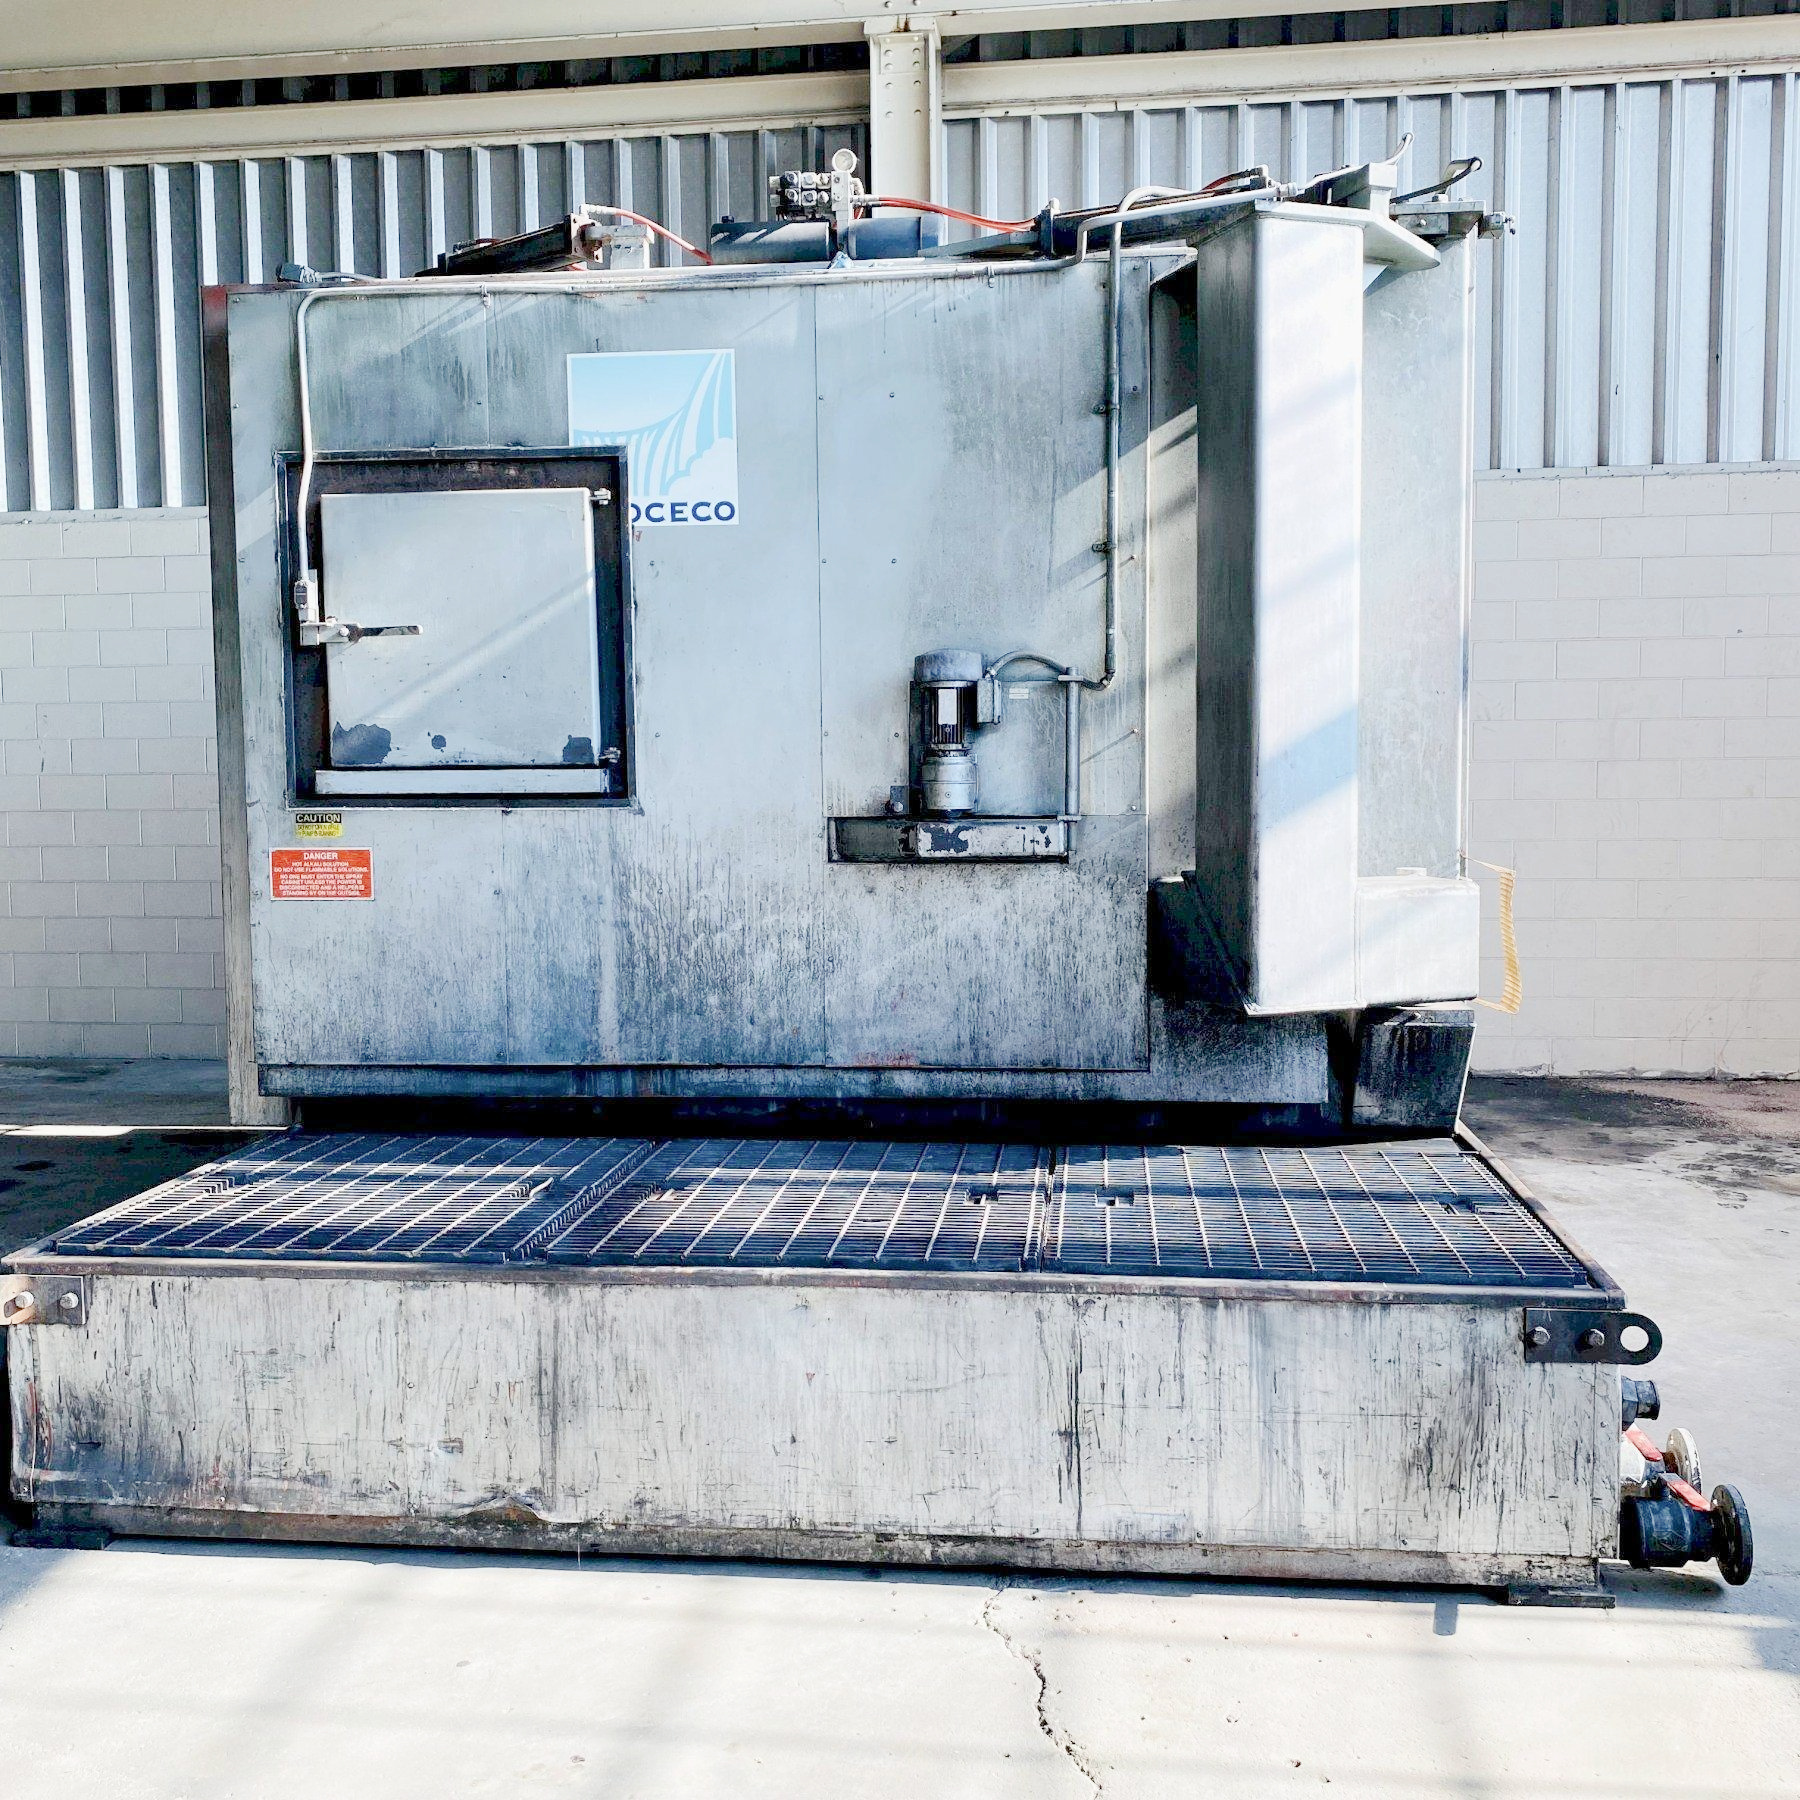 Proceco Model #HD-100-48-G-6000 Rotary Table Gas Fired Parts Washer (used) Item # UE-082621D (Ohio)